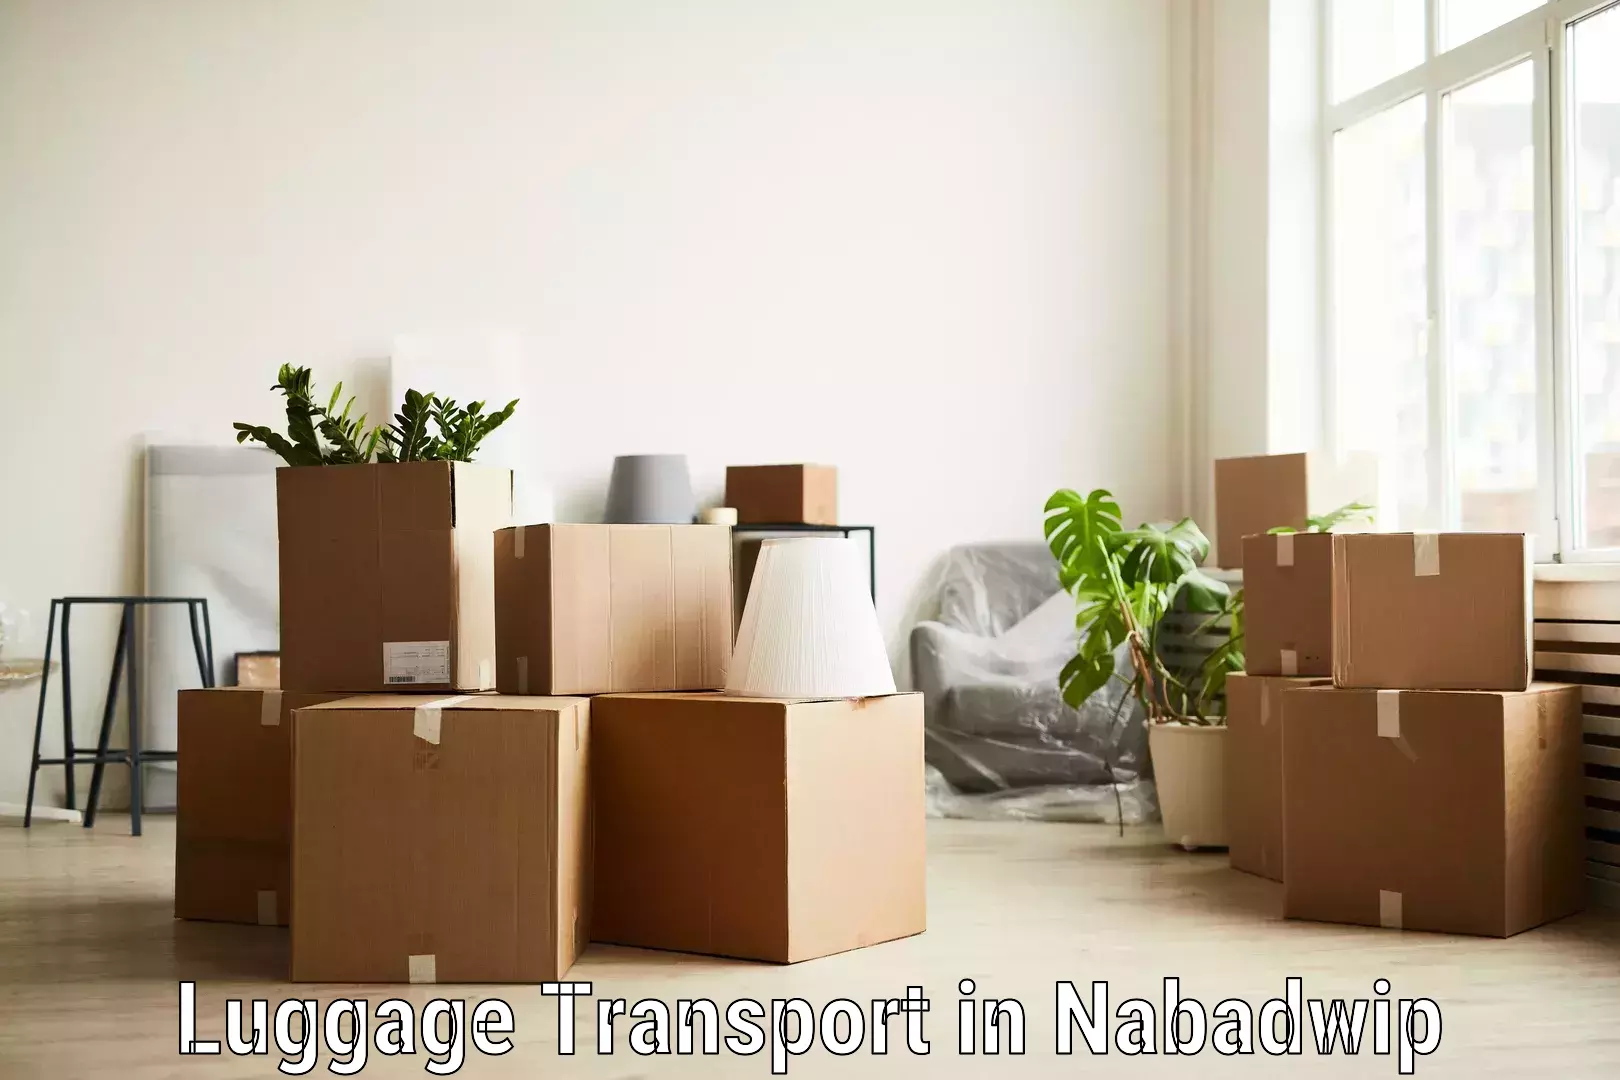 Luggage delivery estimate in Nabadwip